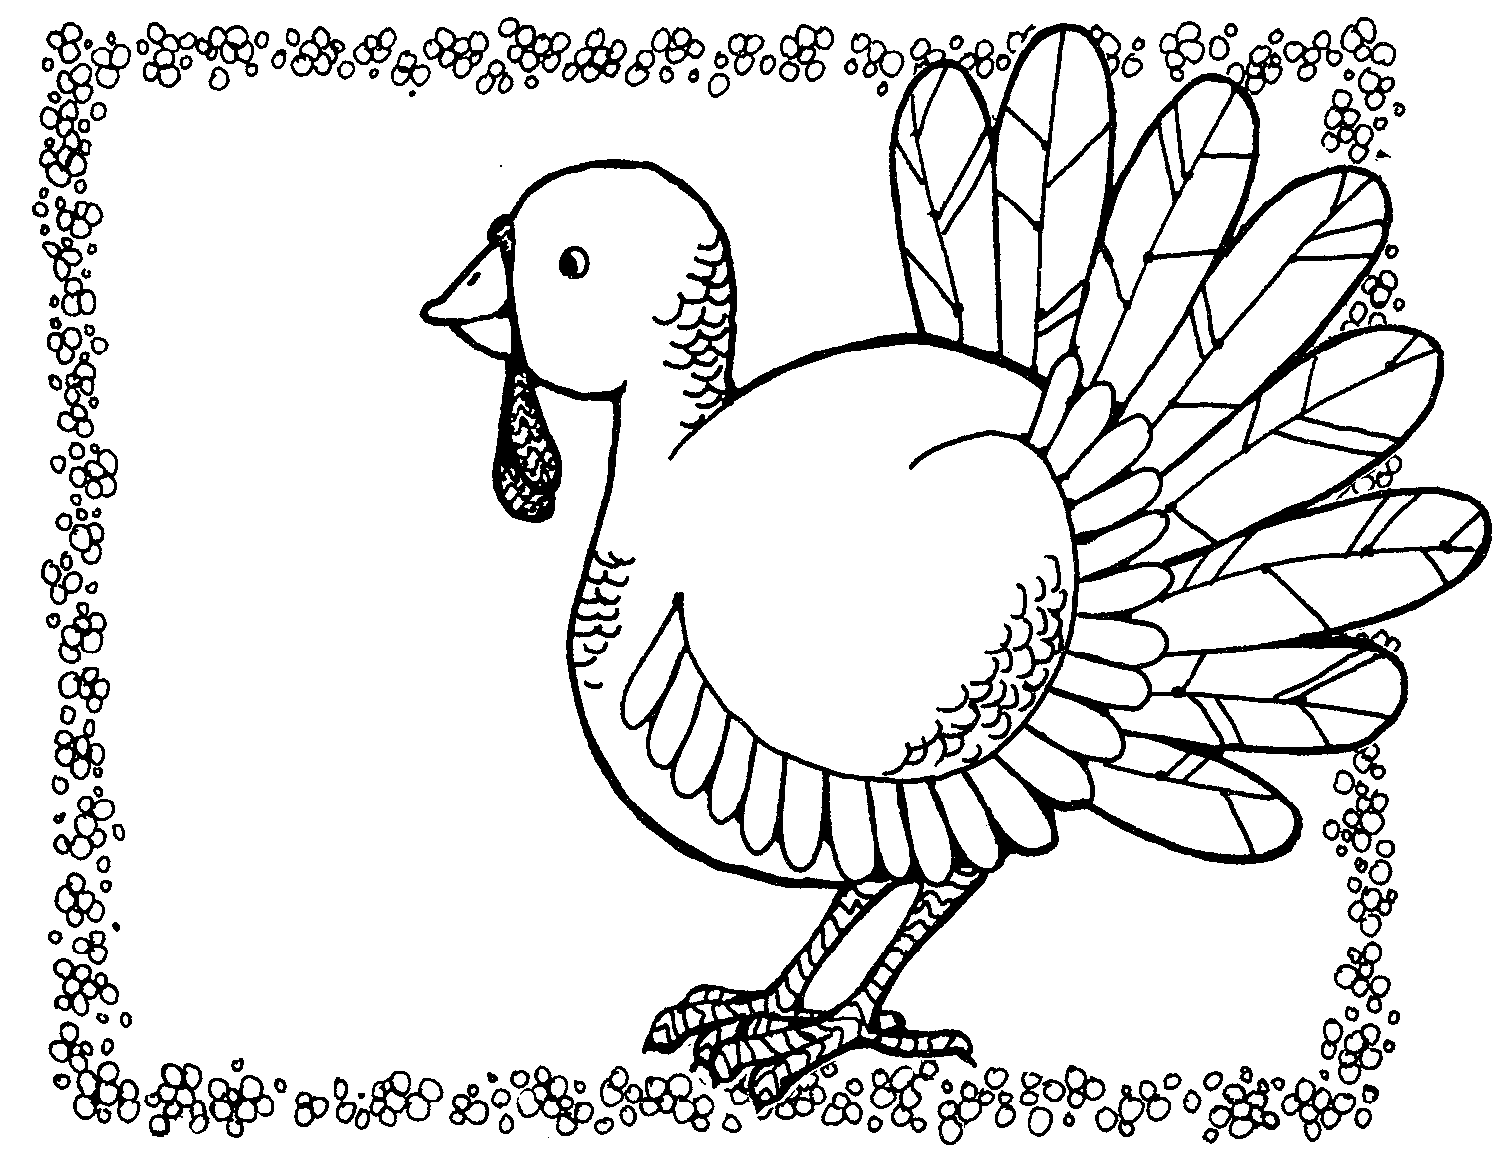 Turkey  black and white turkey black and white turkey clipart 3 wikiclipart